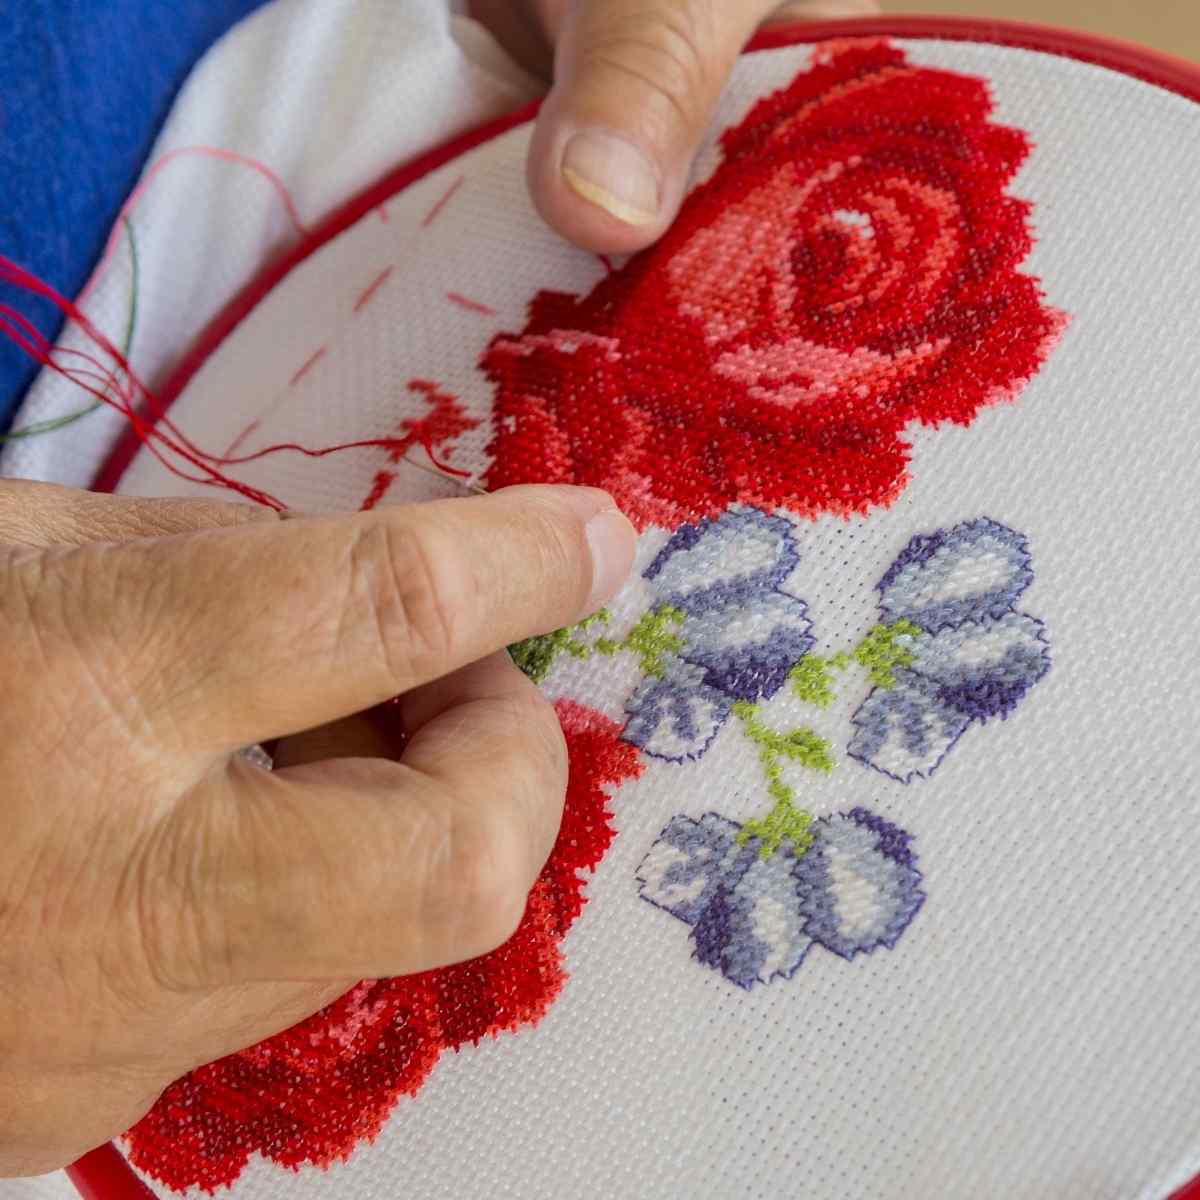 How to embroider flowers